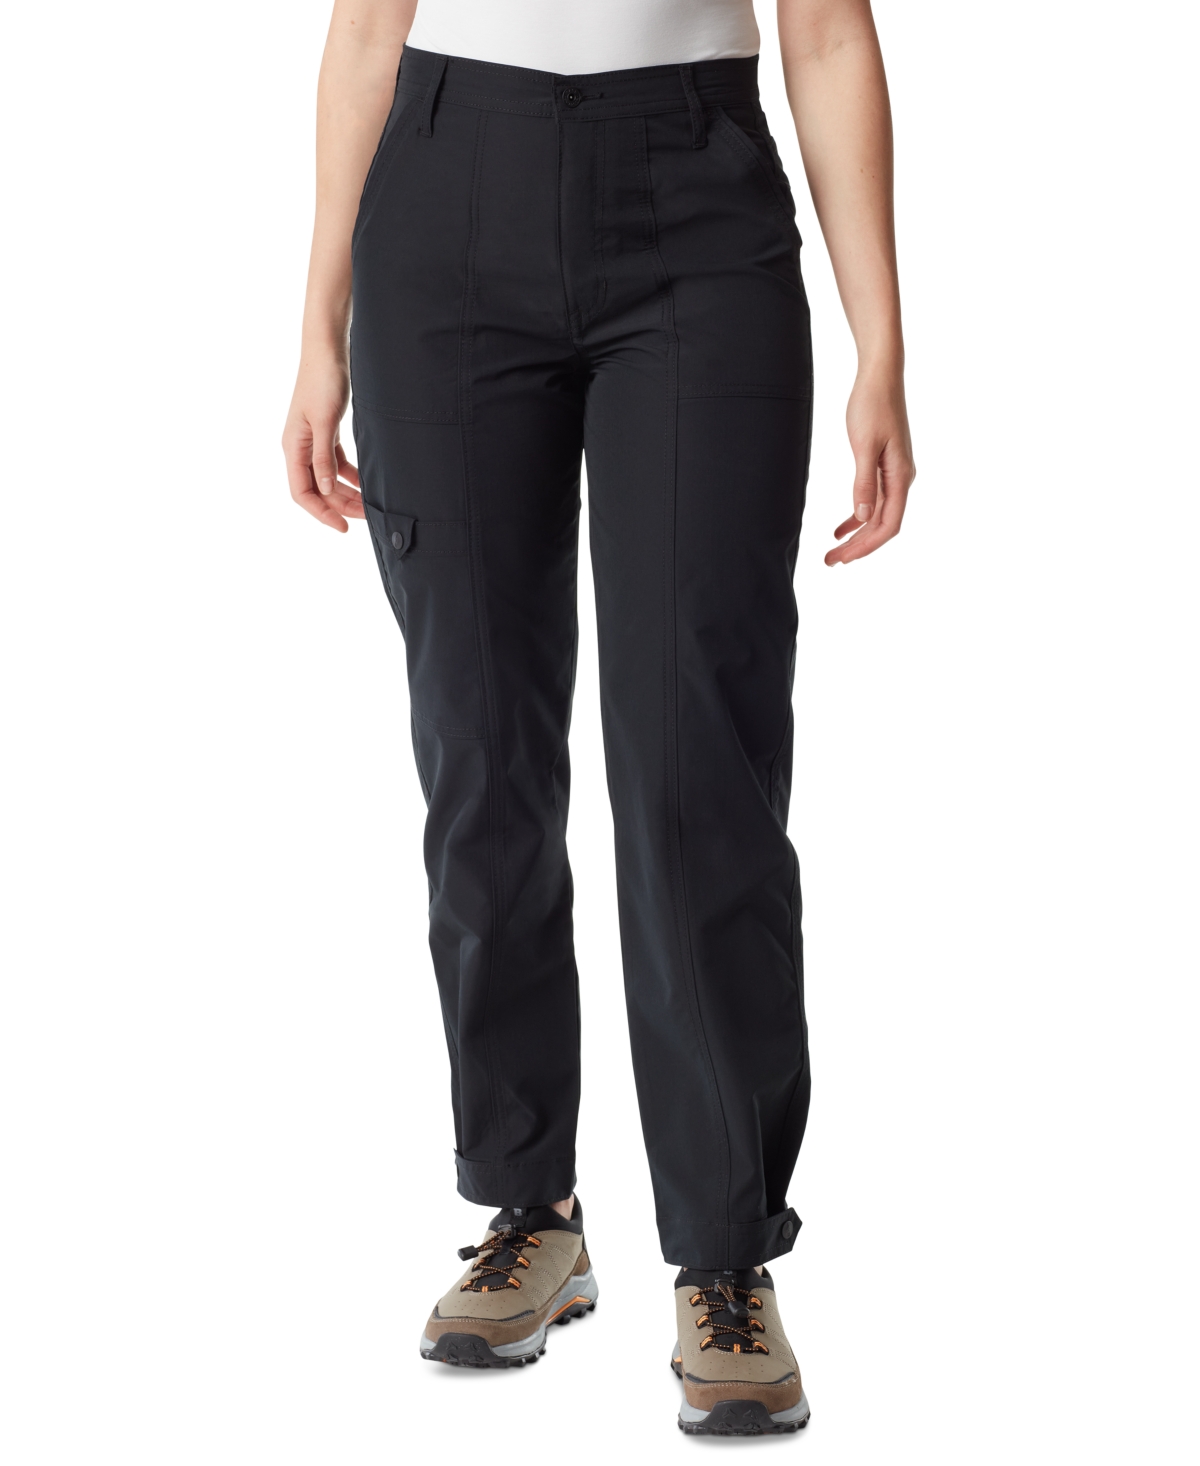 Women's High-Rise Tapered Snap Pants - Black